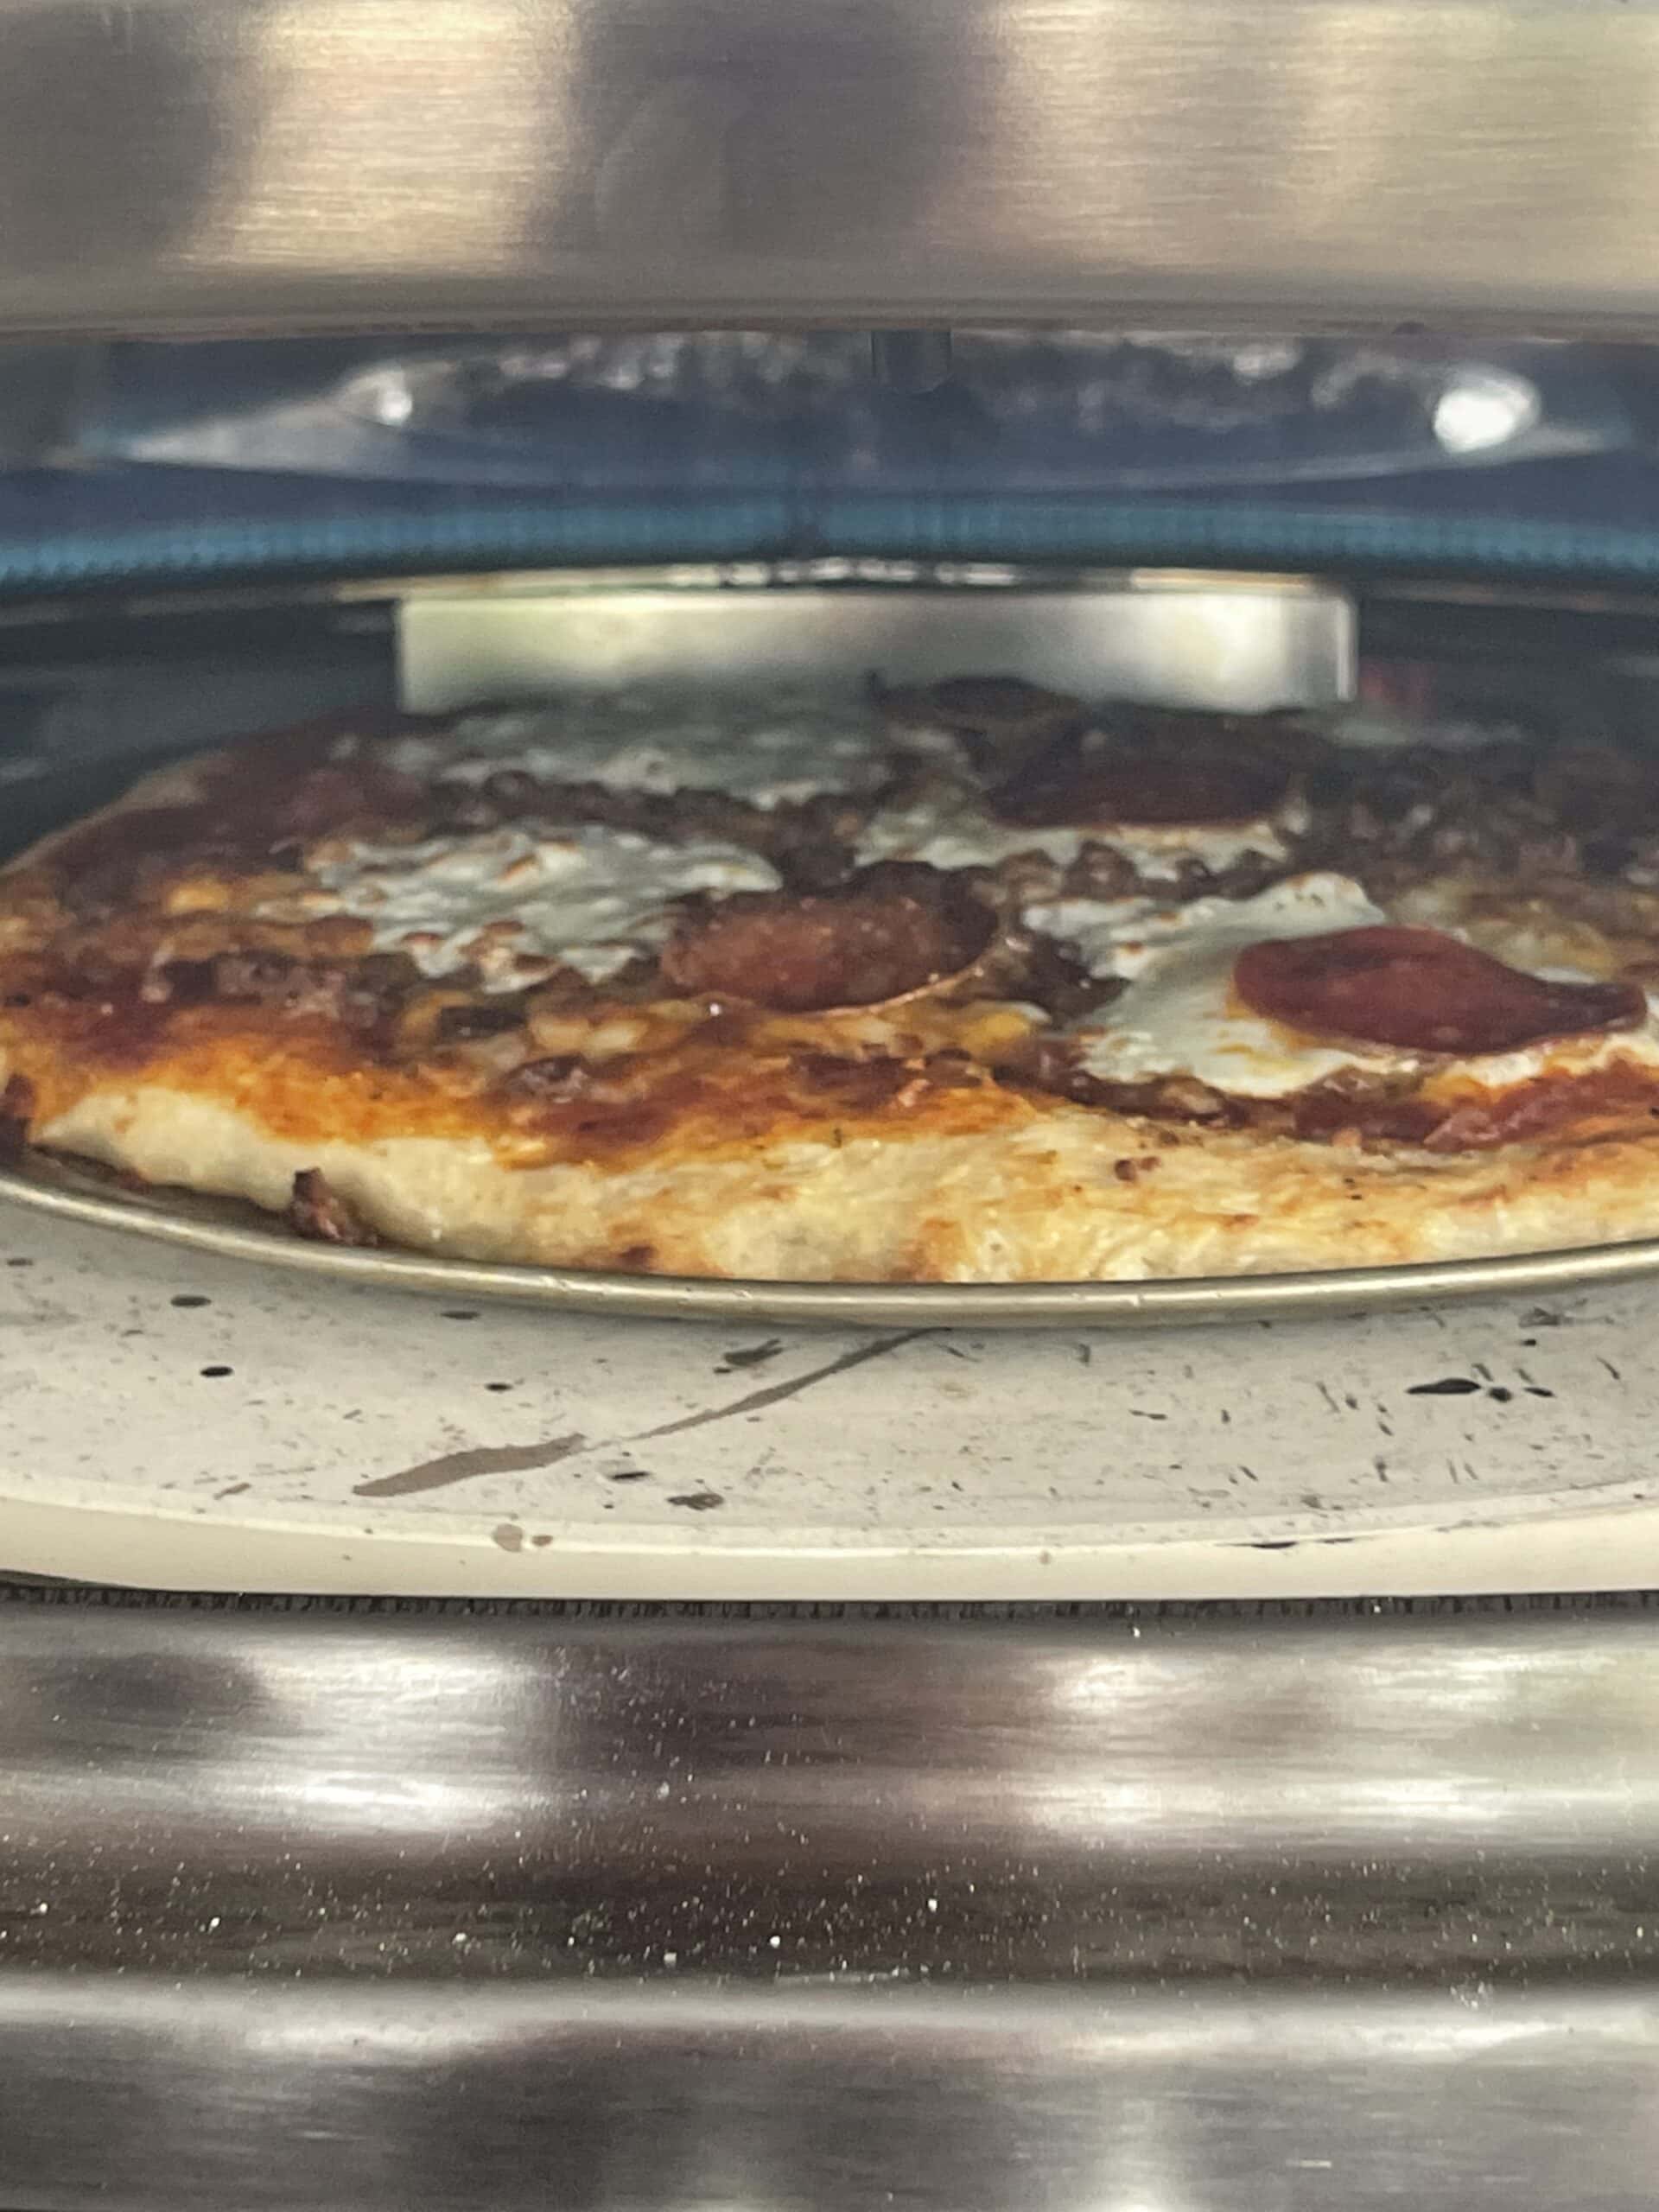 Pizza cooking in the Halo Versa 16 oven